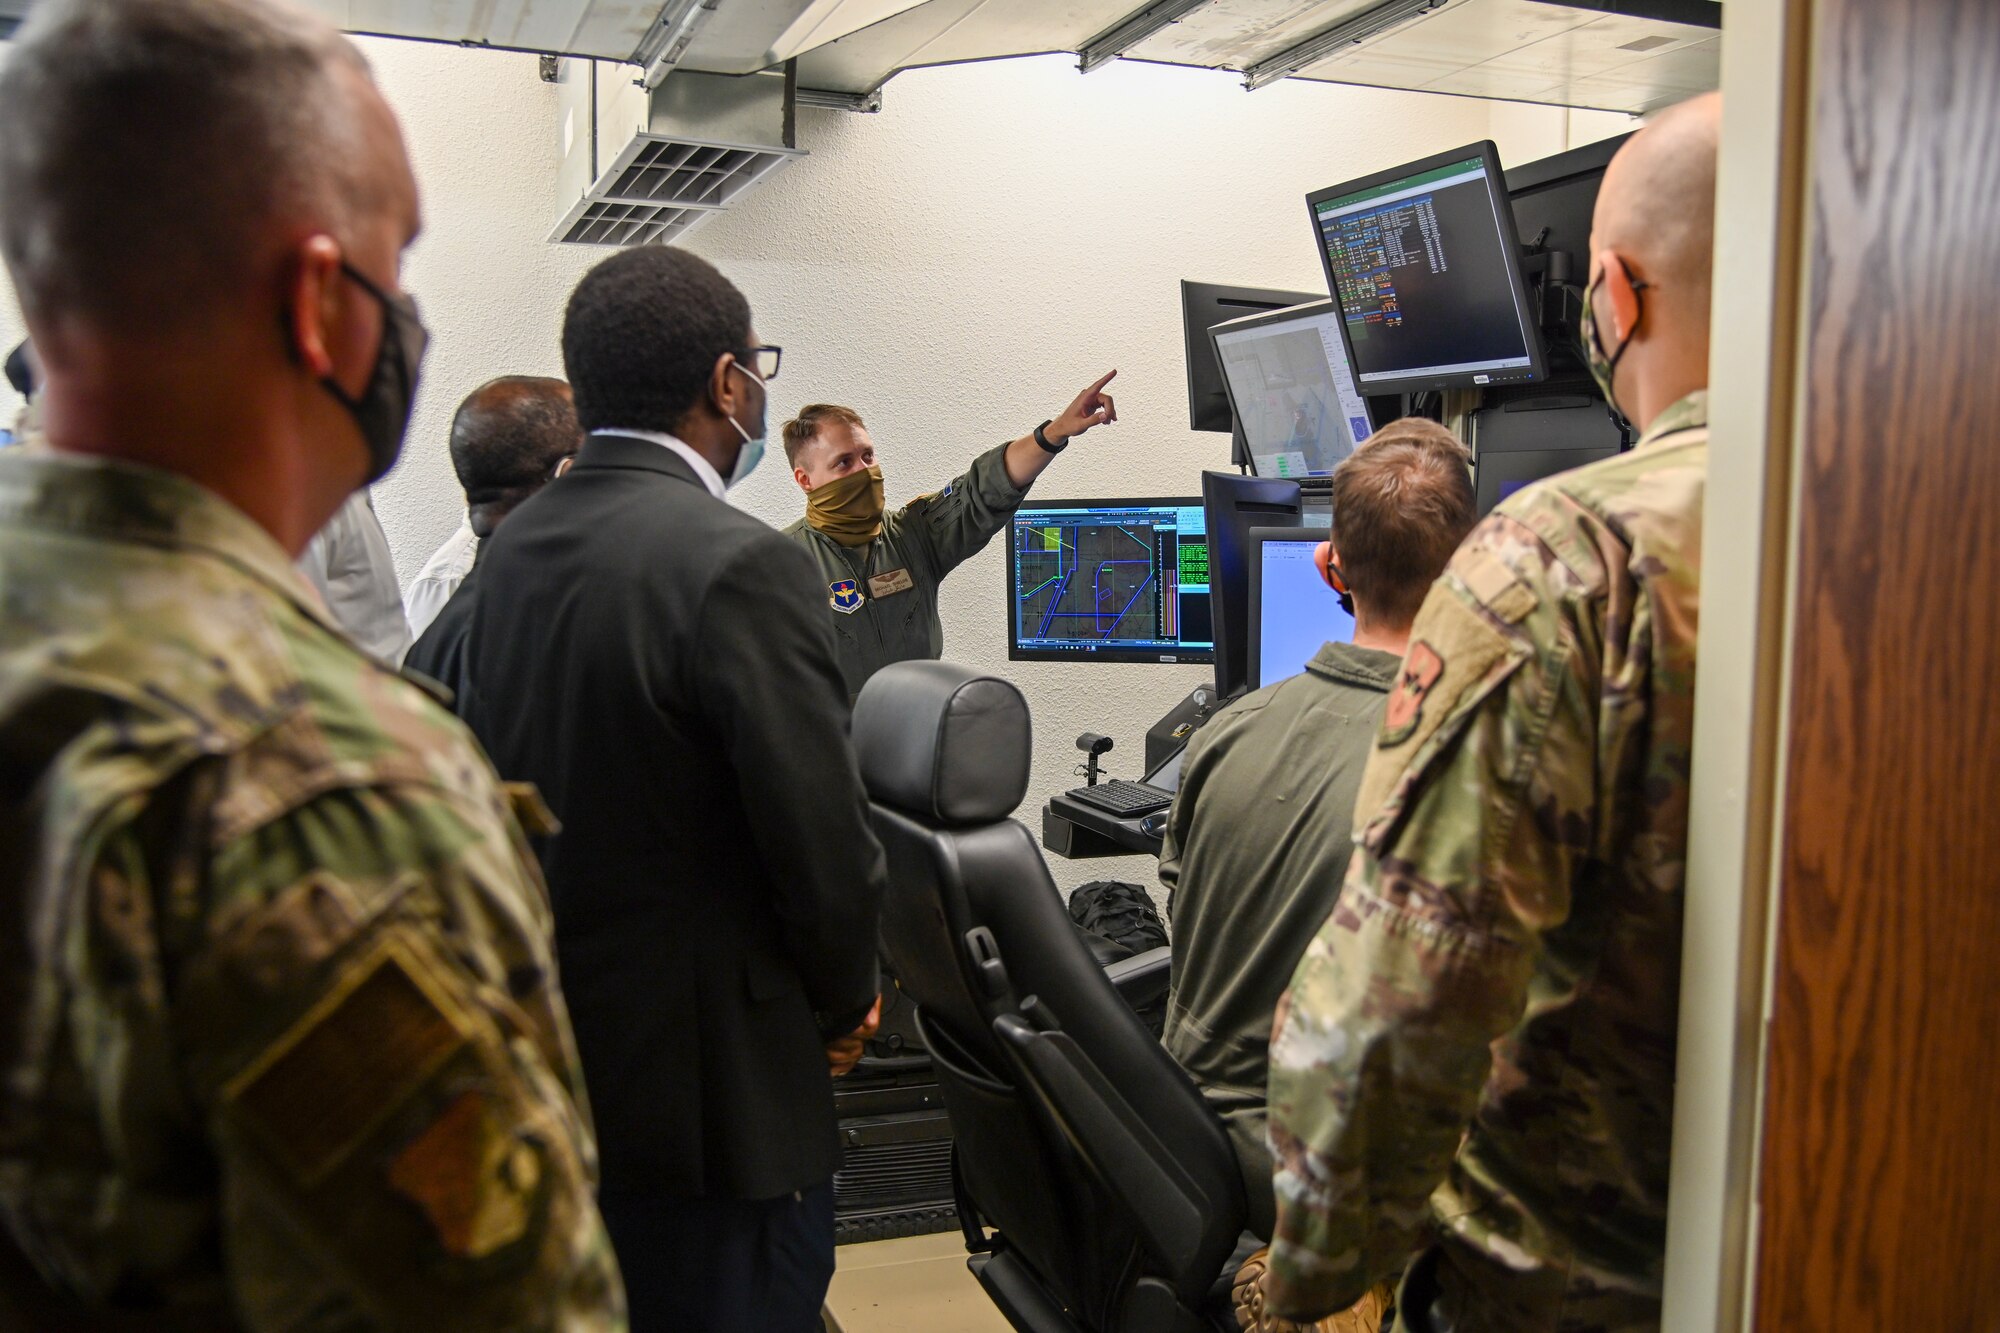 Capt. Michael Shields, 9th Attack Squadron MQ-9 instructor pilot, demonstrates an MQ-9 Reaper simulator to local clergy members during Clergy Day, Nov. 4, 2021, on Holloman Air Force Base, New Mexico. Local clergy members were given a tour of the 16th Training Squadron MQ-9 simulator to see Holloman’s capabilities and Airmen and Guardians in action. (U.S. Air Force photo by Airman 1st Class Jessica Sanchez-Chen)